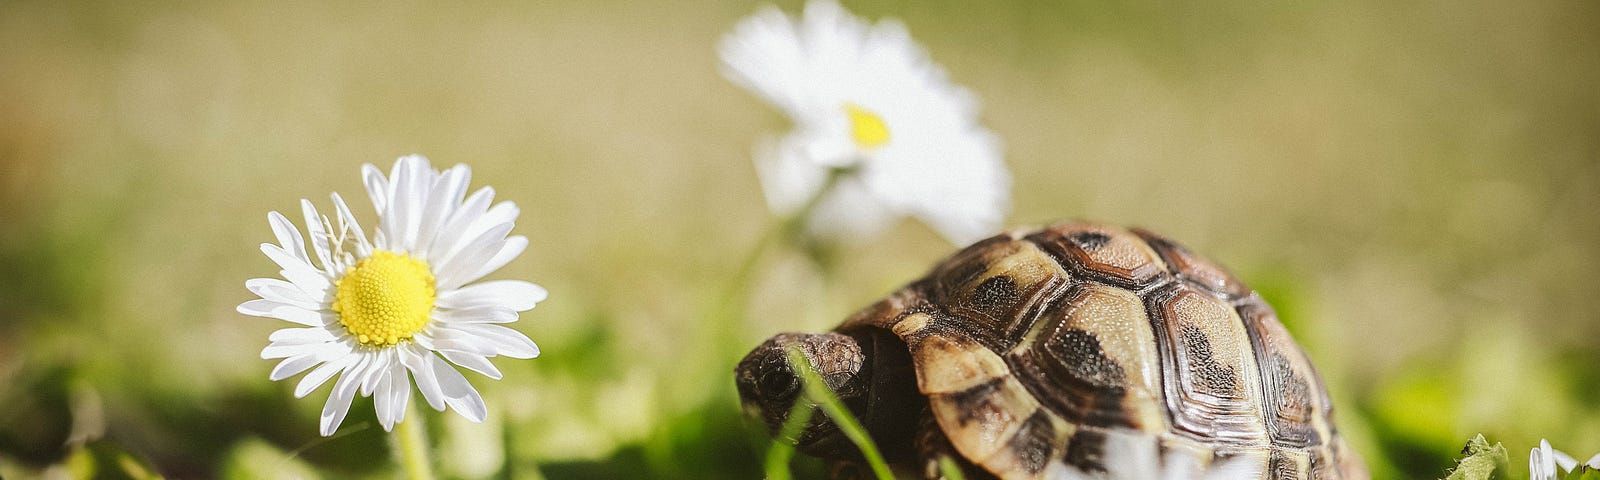 A small tortoise on grass with daisies.